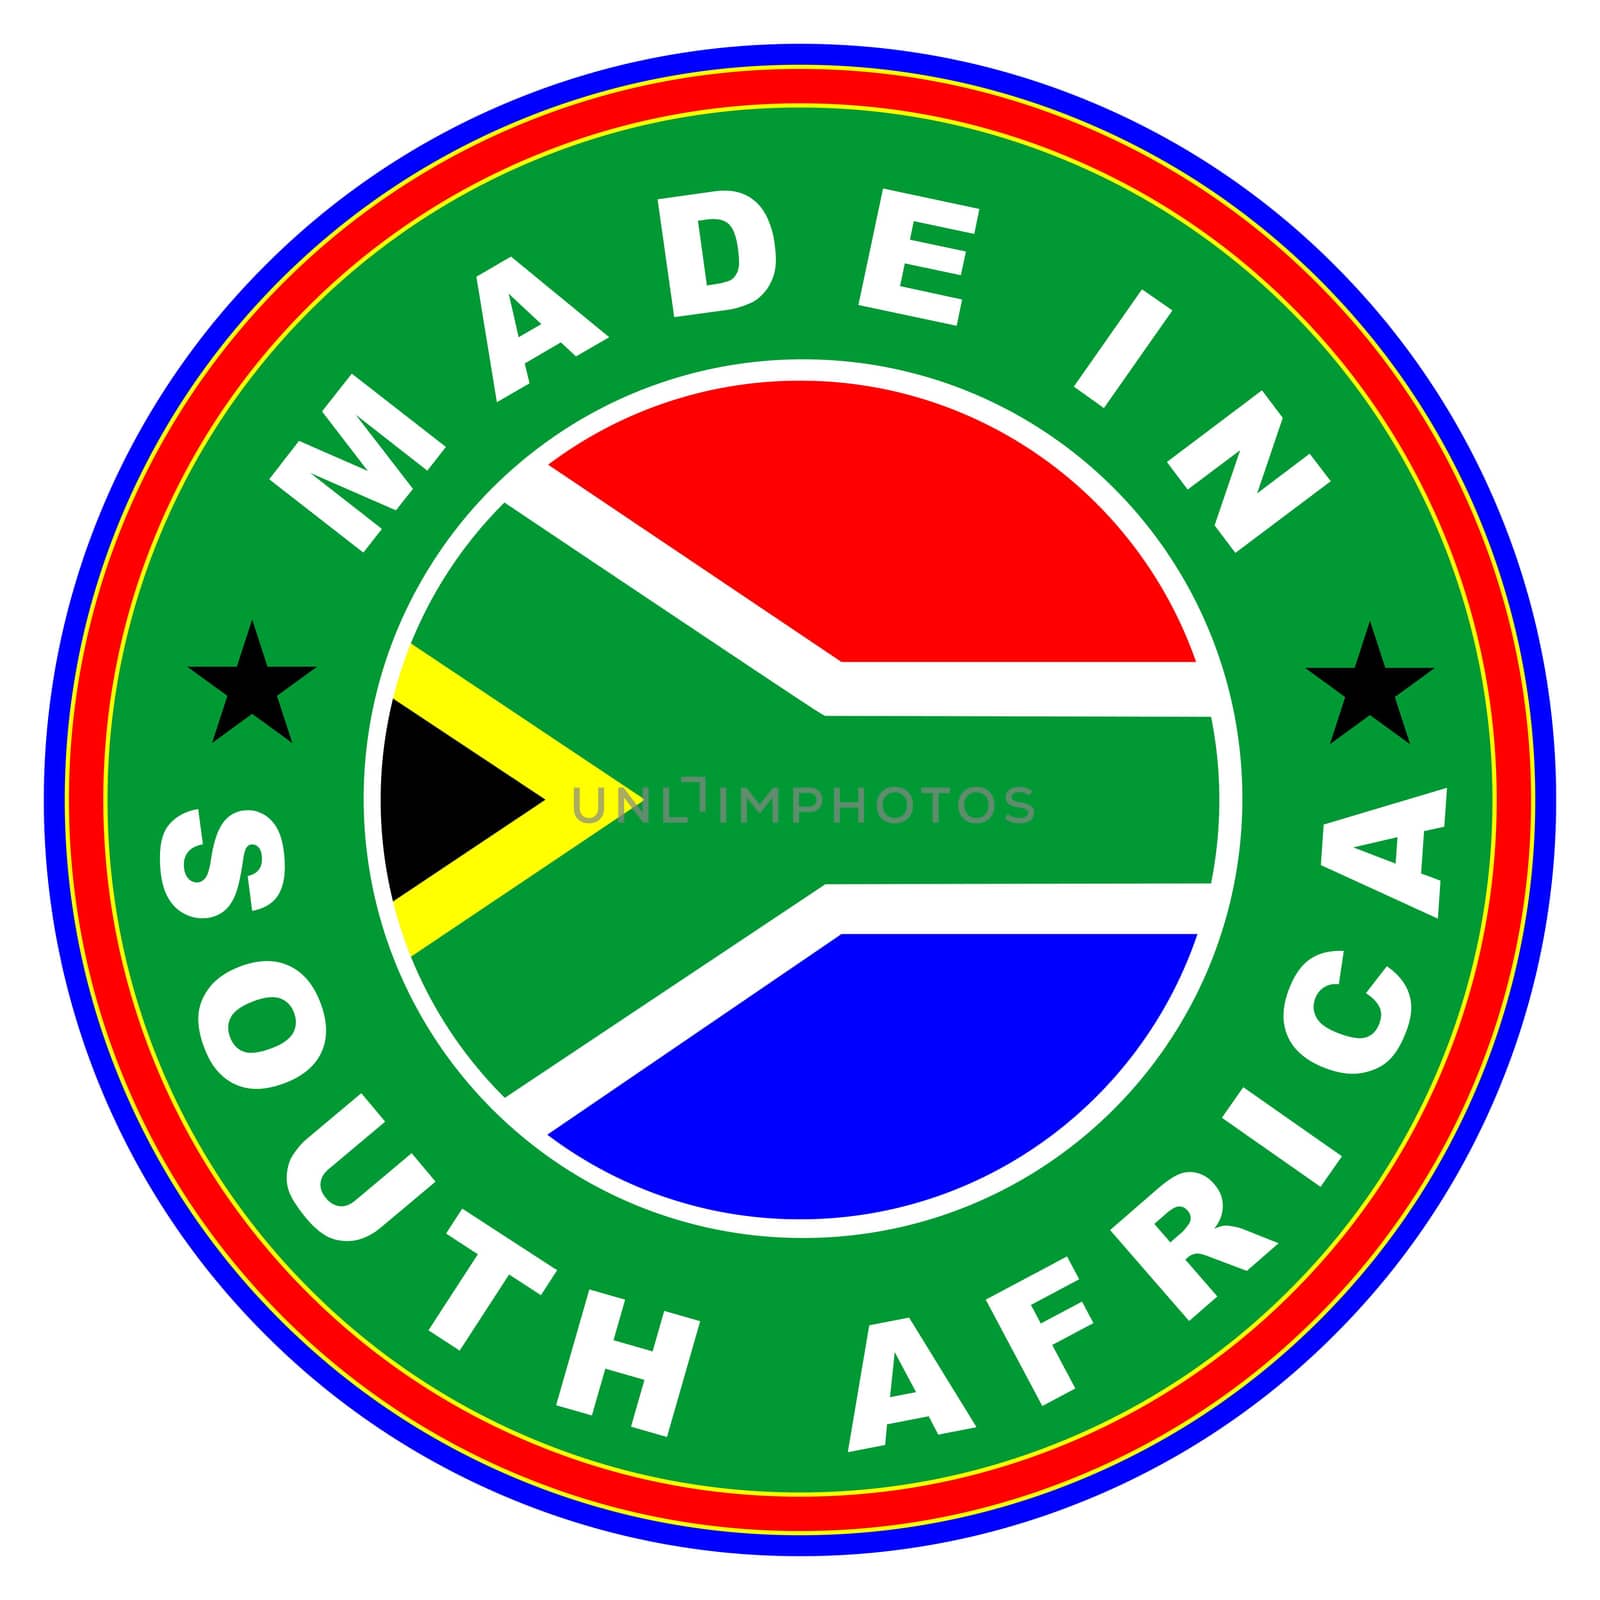 made in south africa by tony4urban